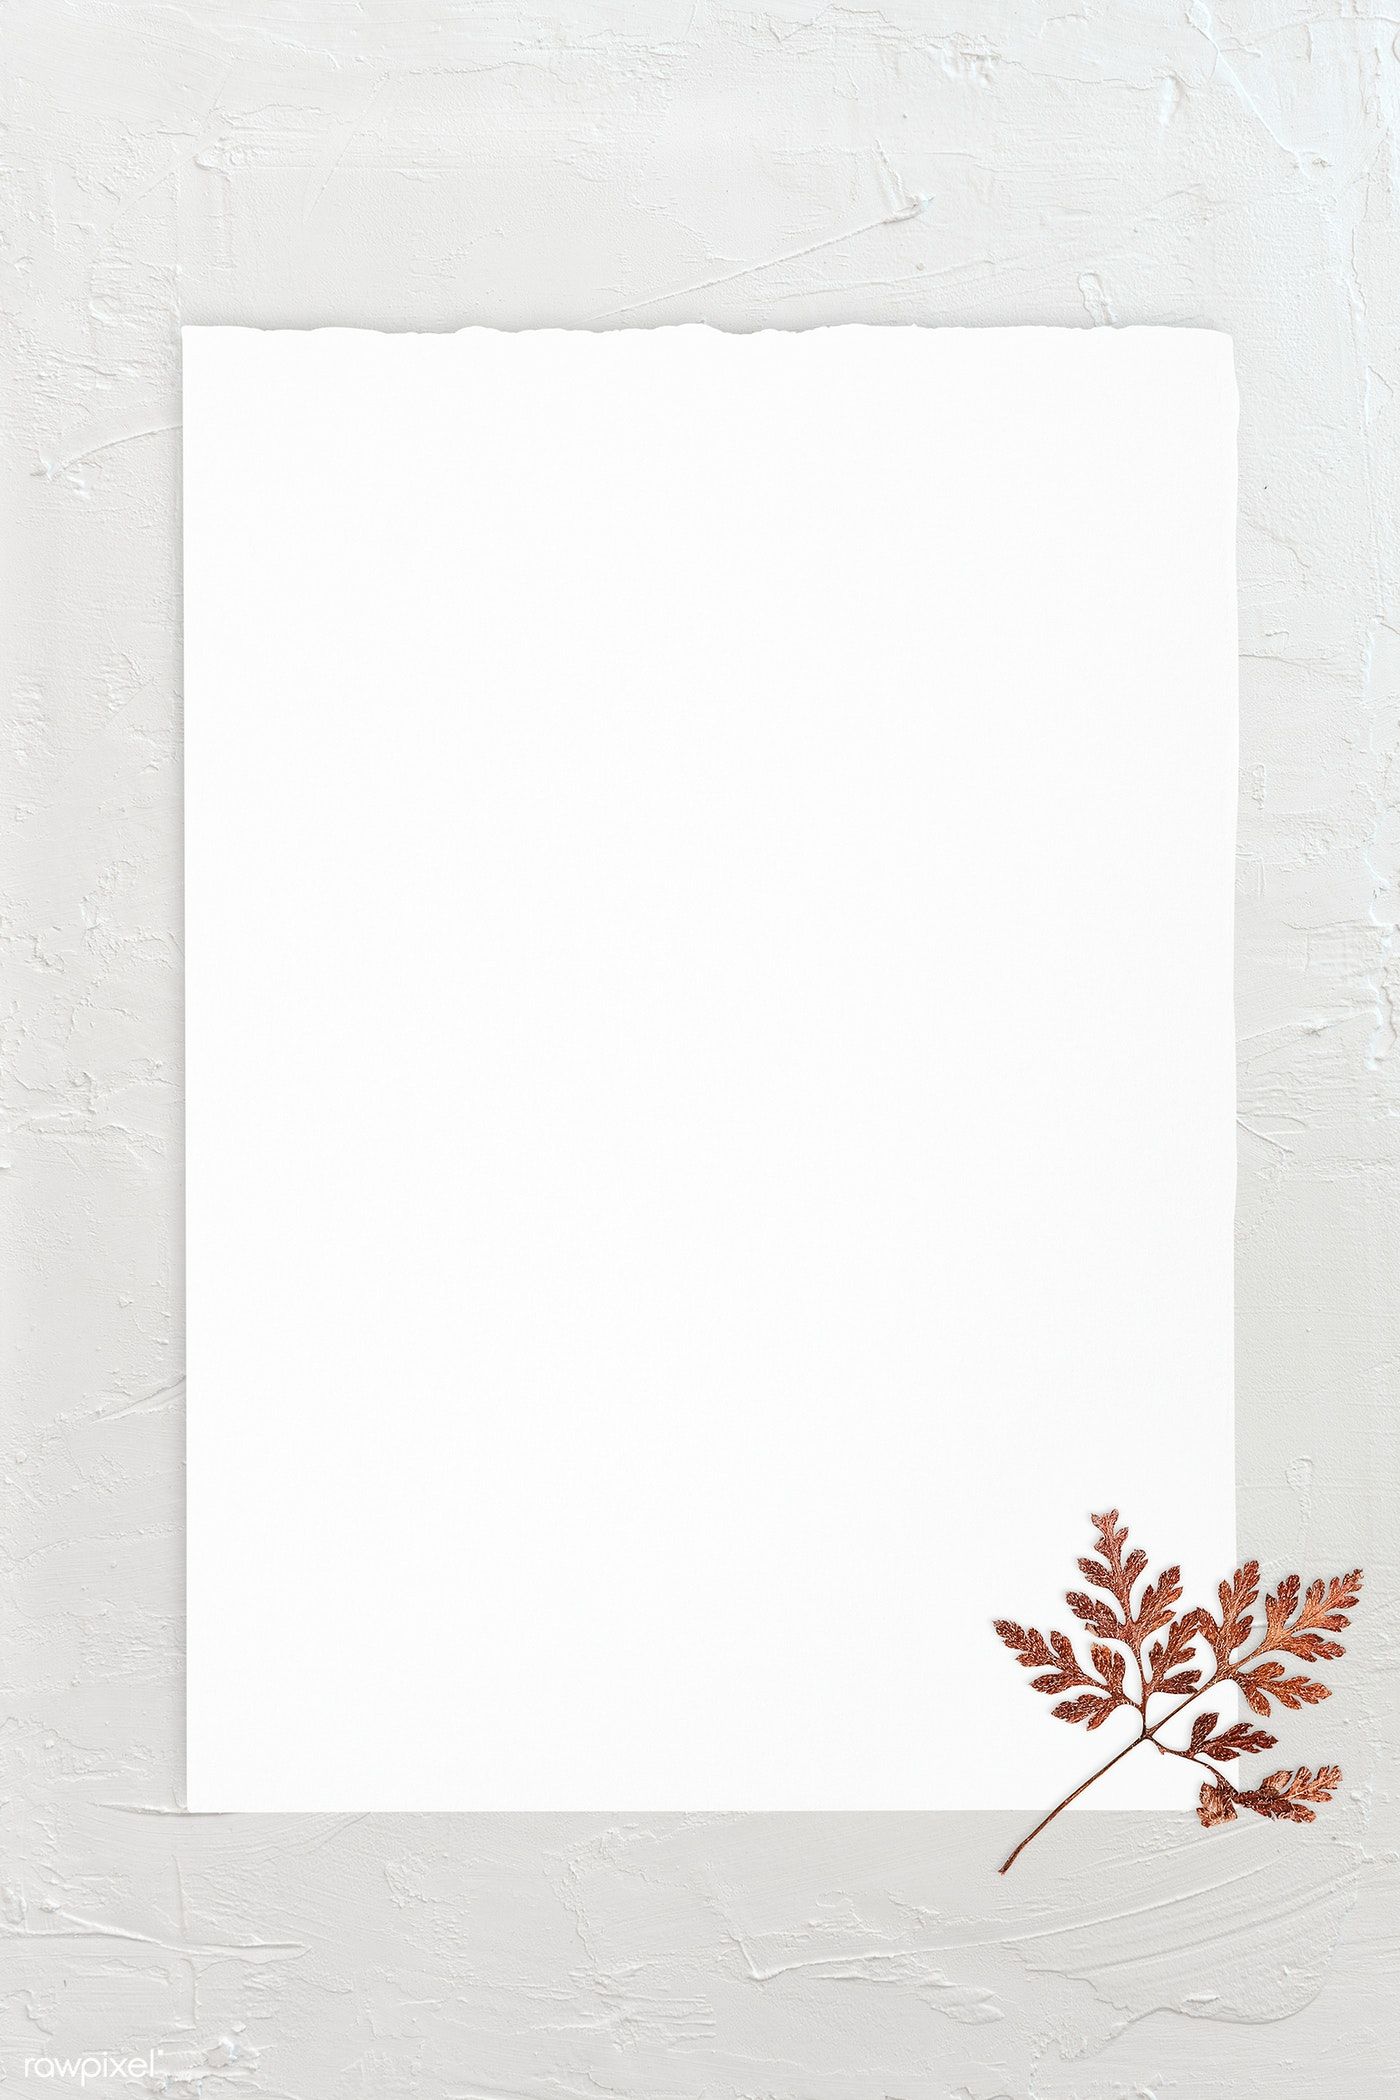 Download premium psd of Blank white paper with dry leaf 1201827. Paper , Flower background wallpaper, Collage background